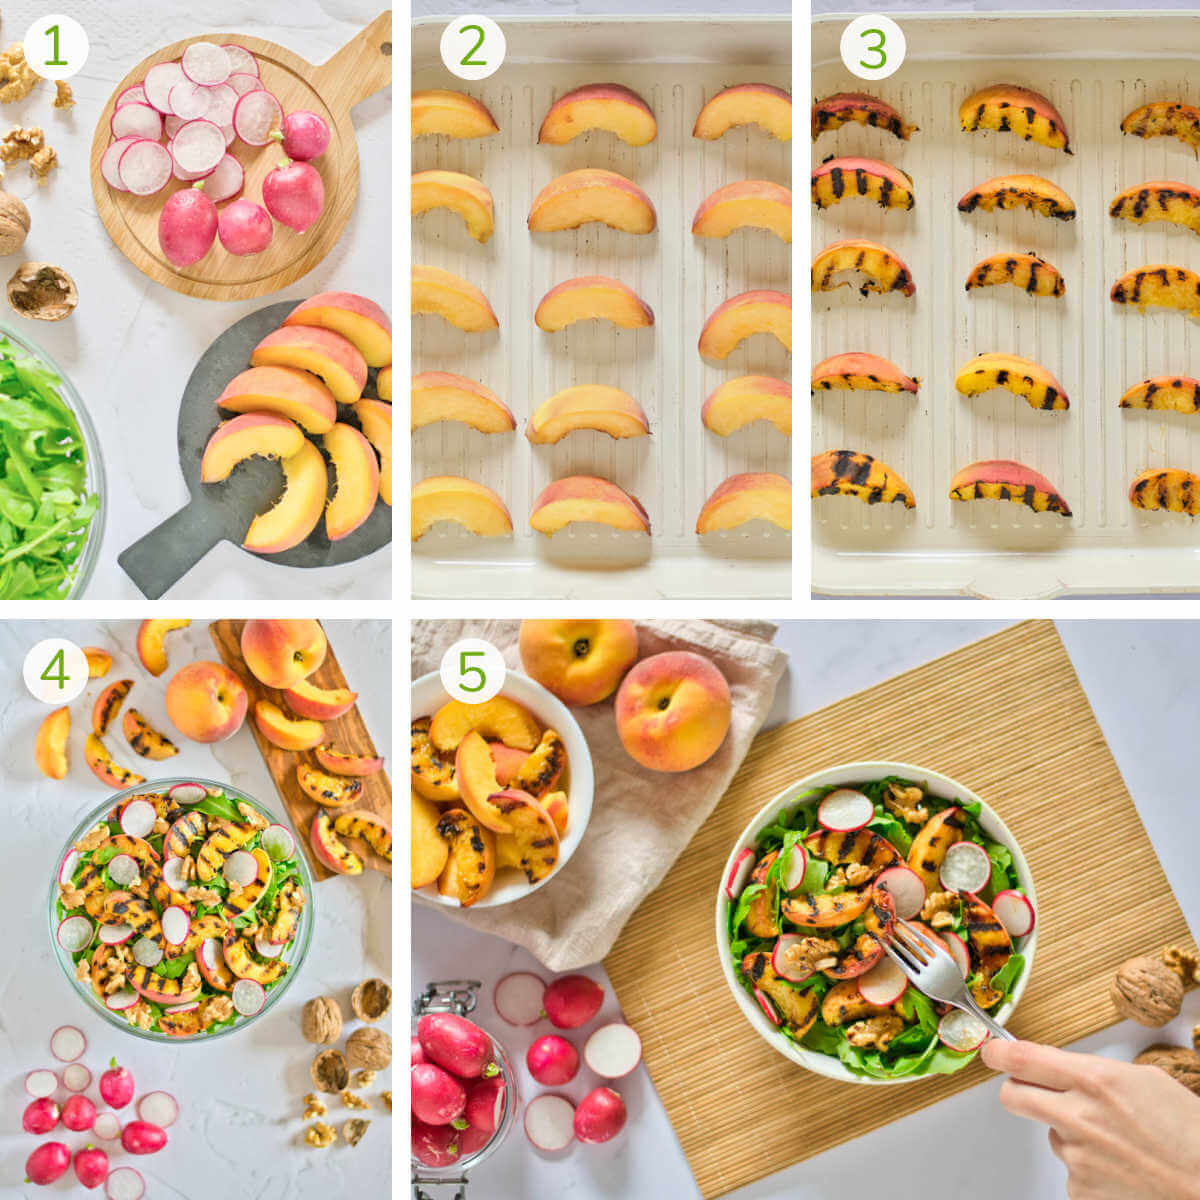 instruction photos showing how to prep the meal, grill the peaches and assemble the salad.